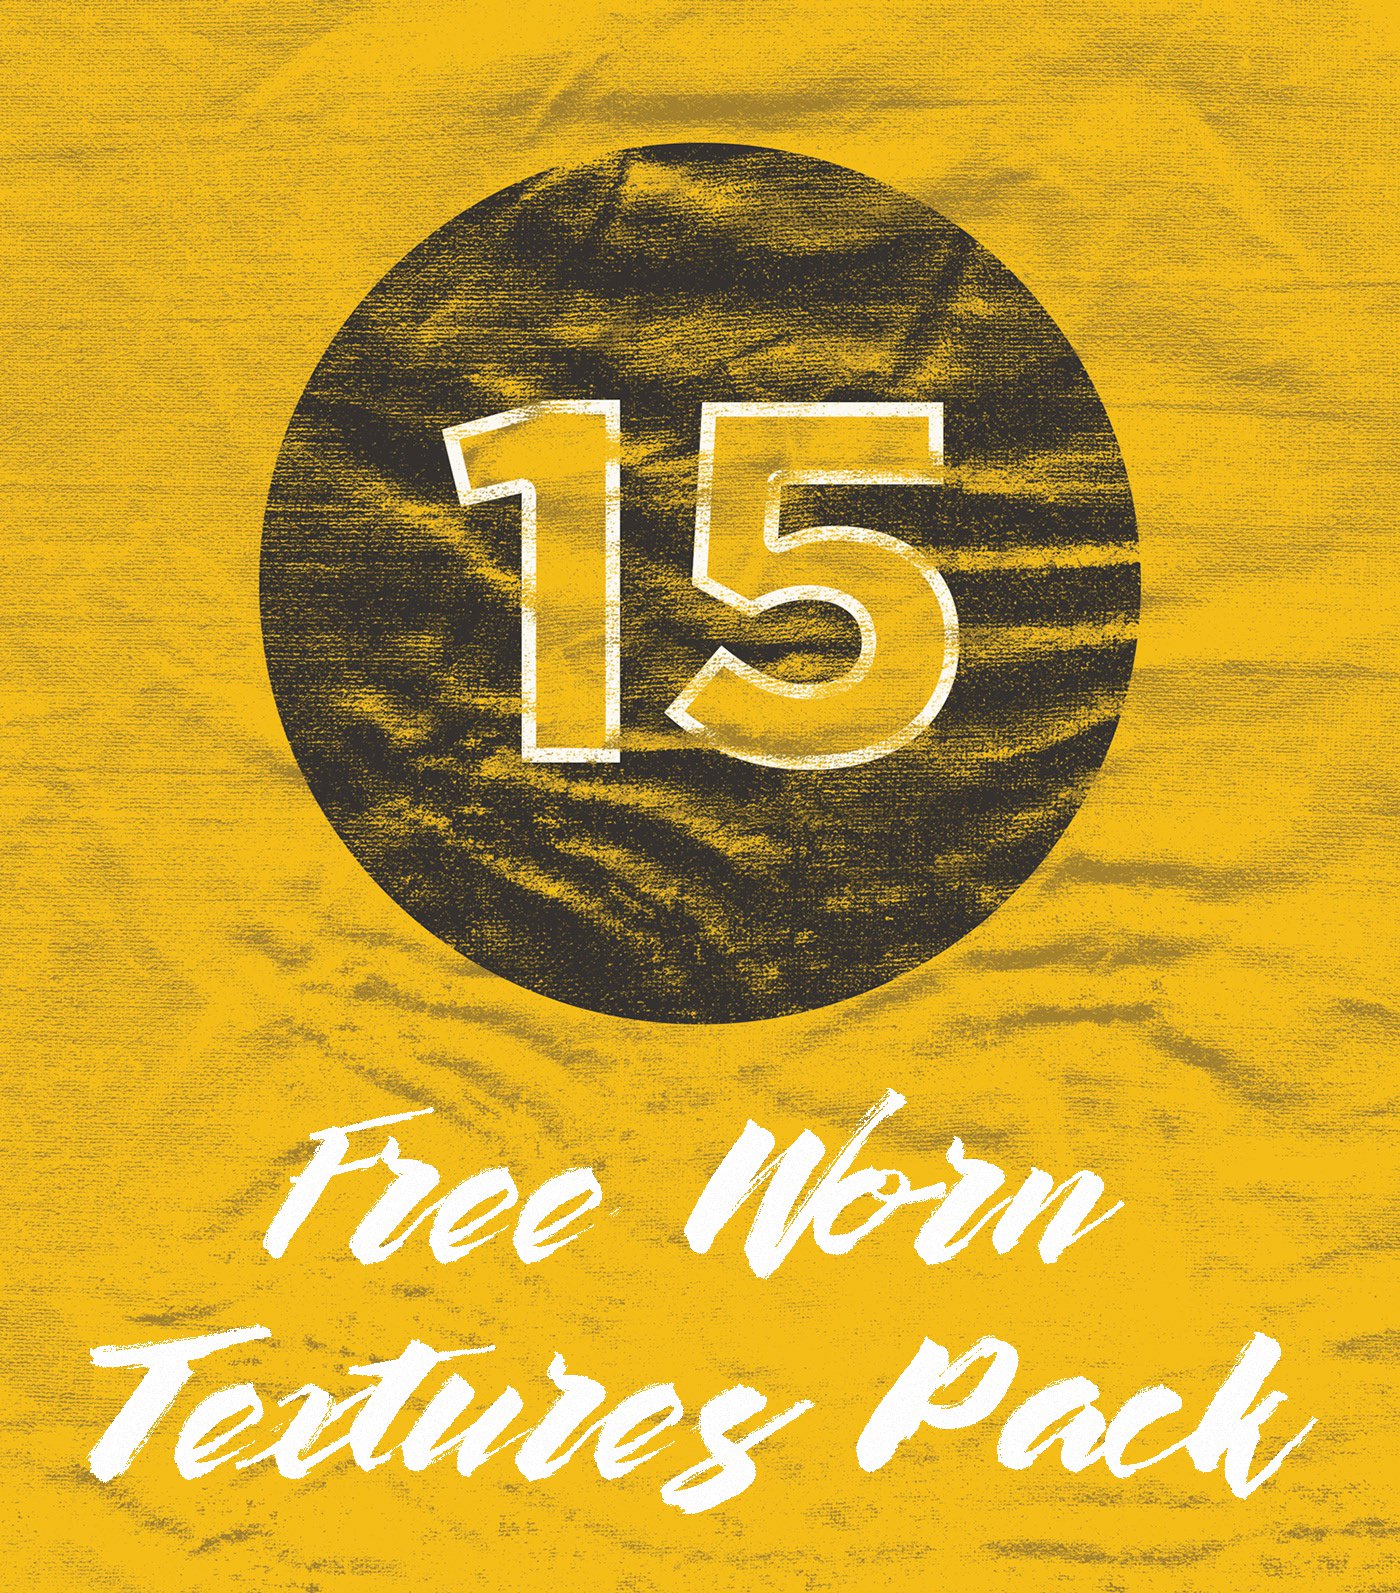 Free Worn Textures Pack